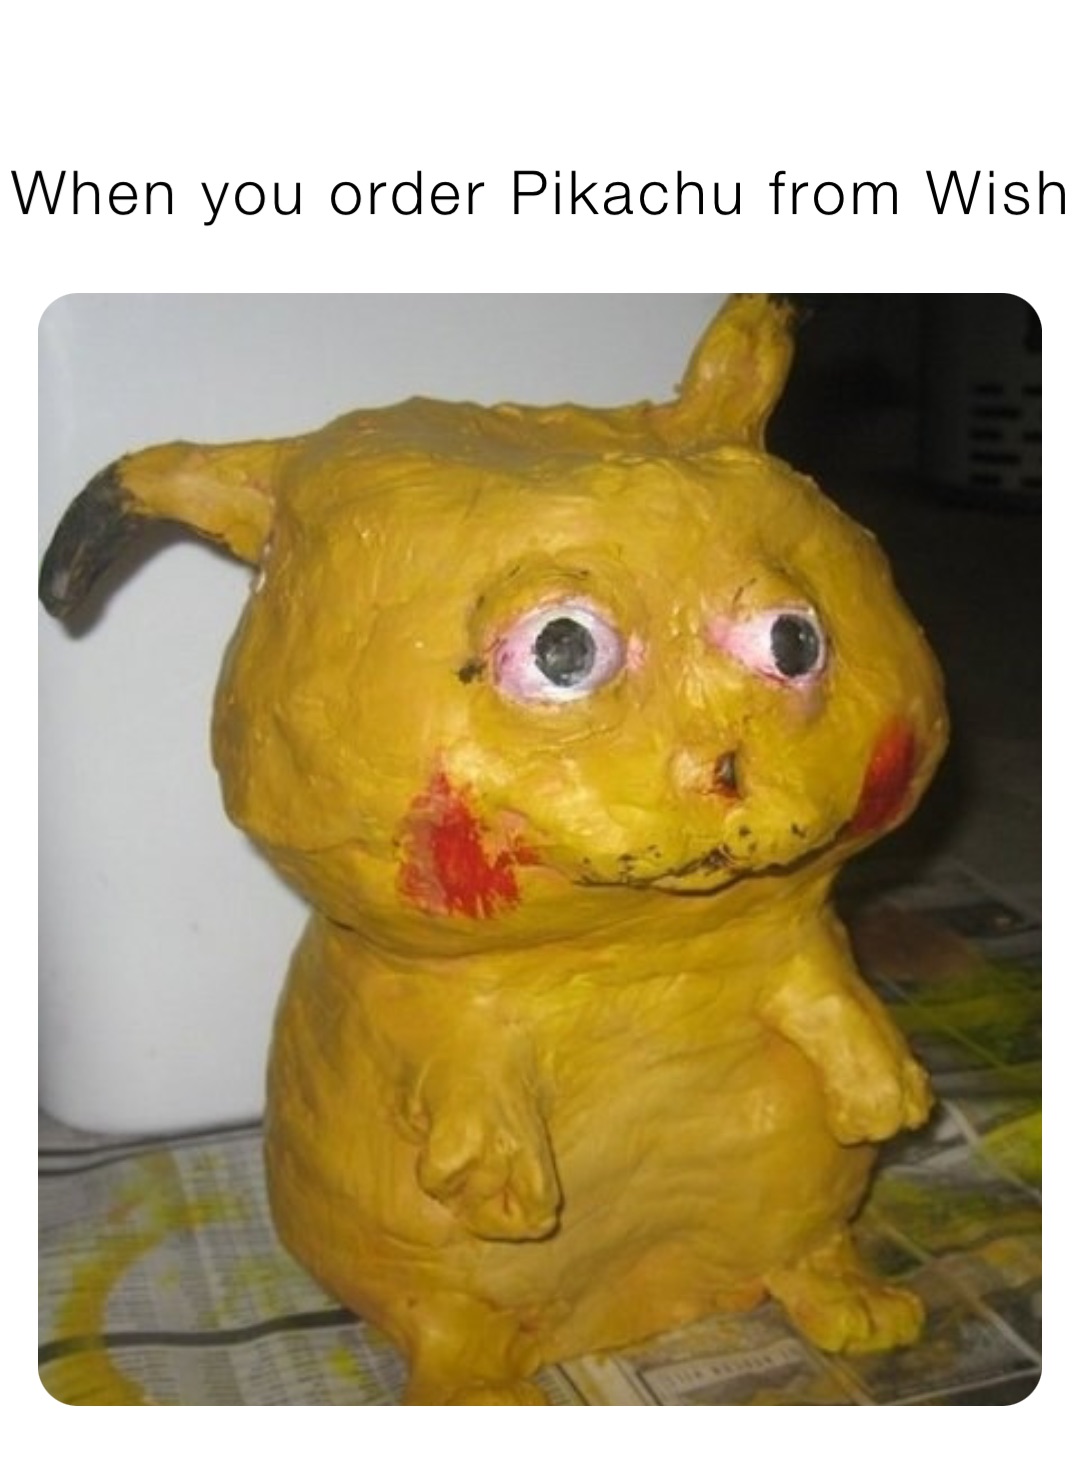 When you order Pikachu from Wish